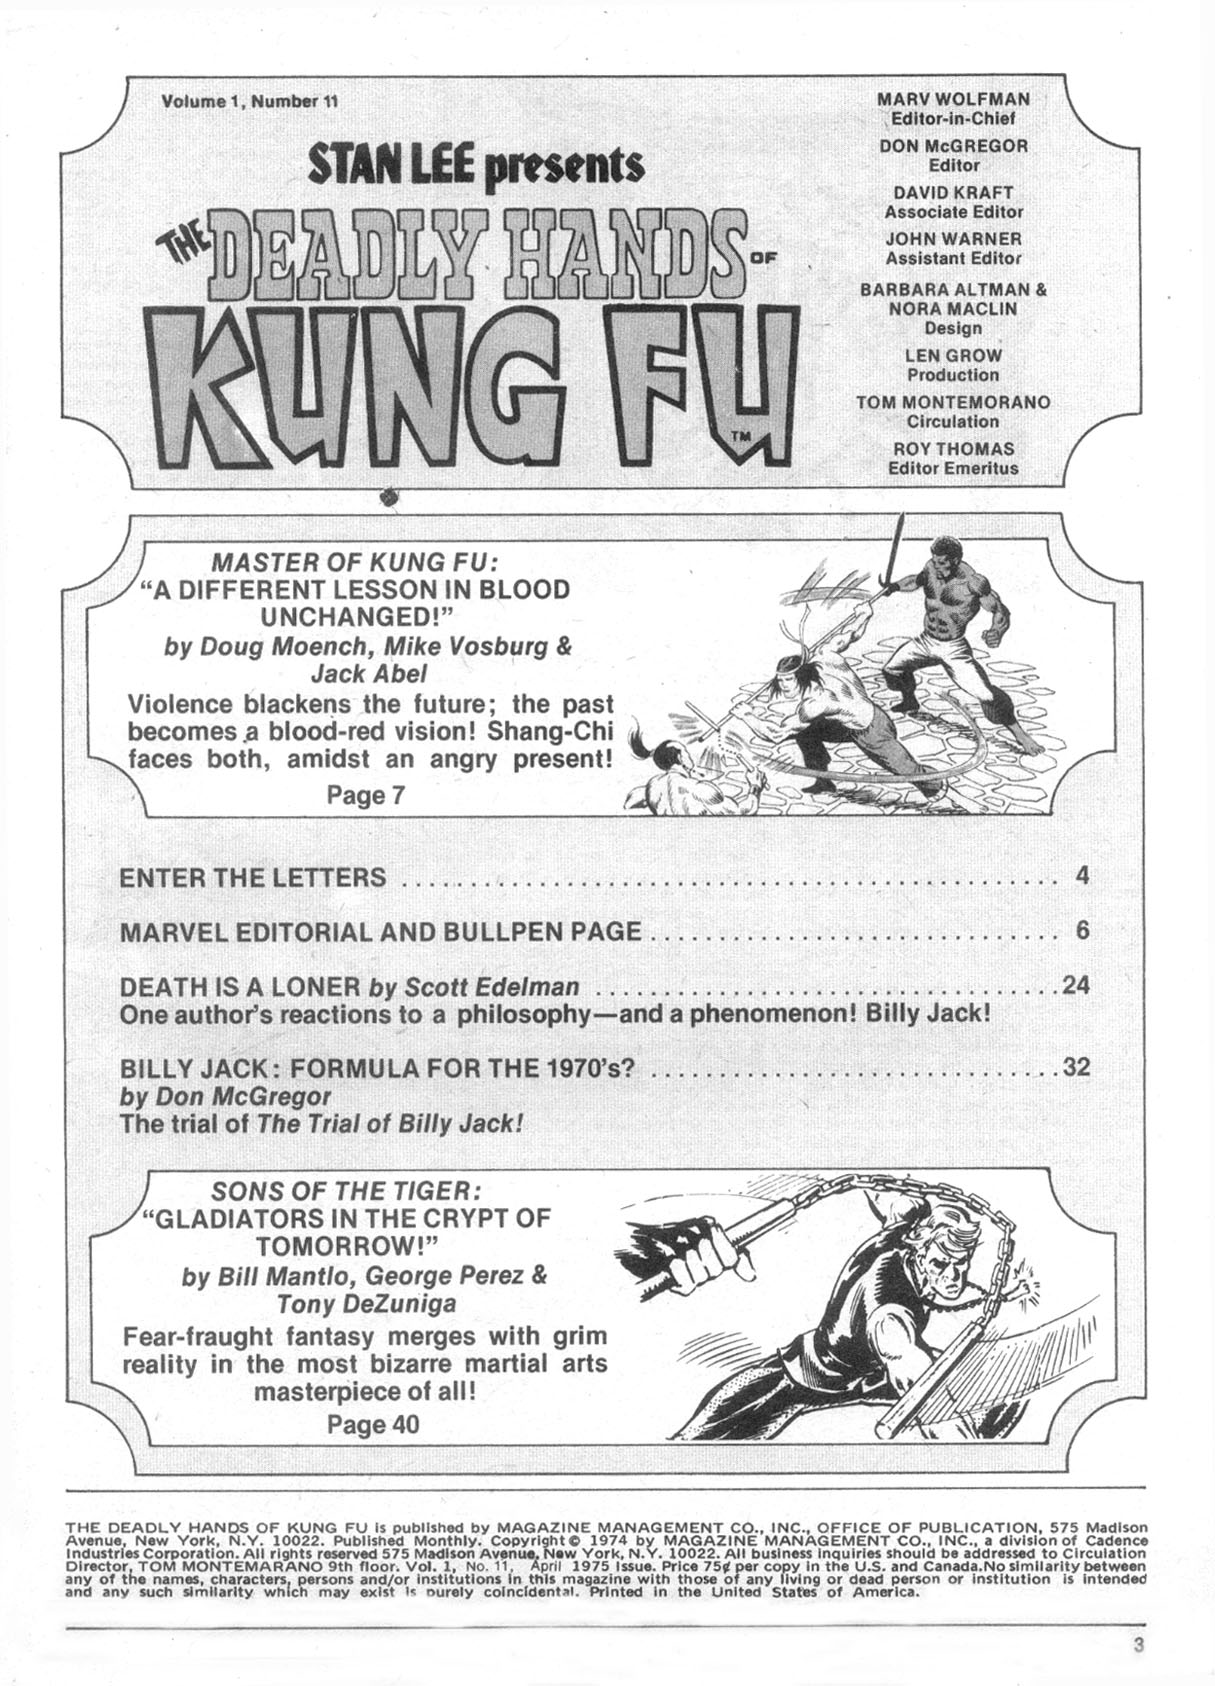 Read online The Deadly Hands of Kung Fu comic -  Issue #11 - 4